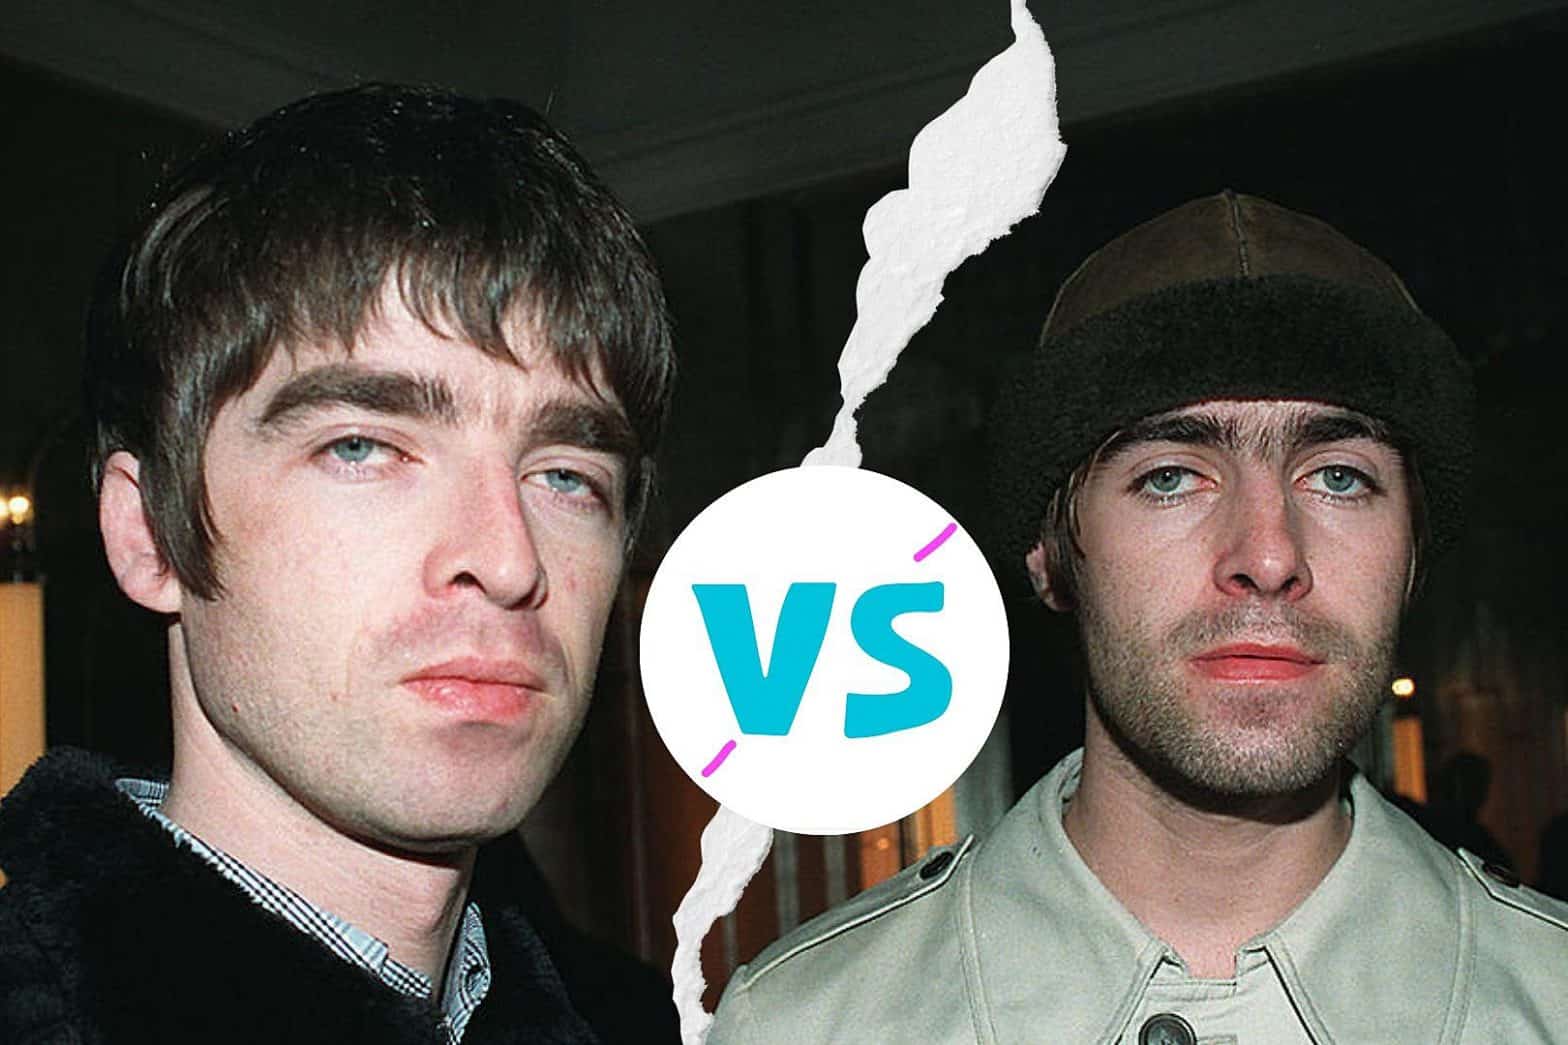 Liam Gallagher and Noel Gallagher.